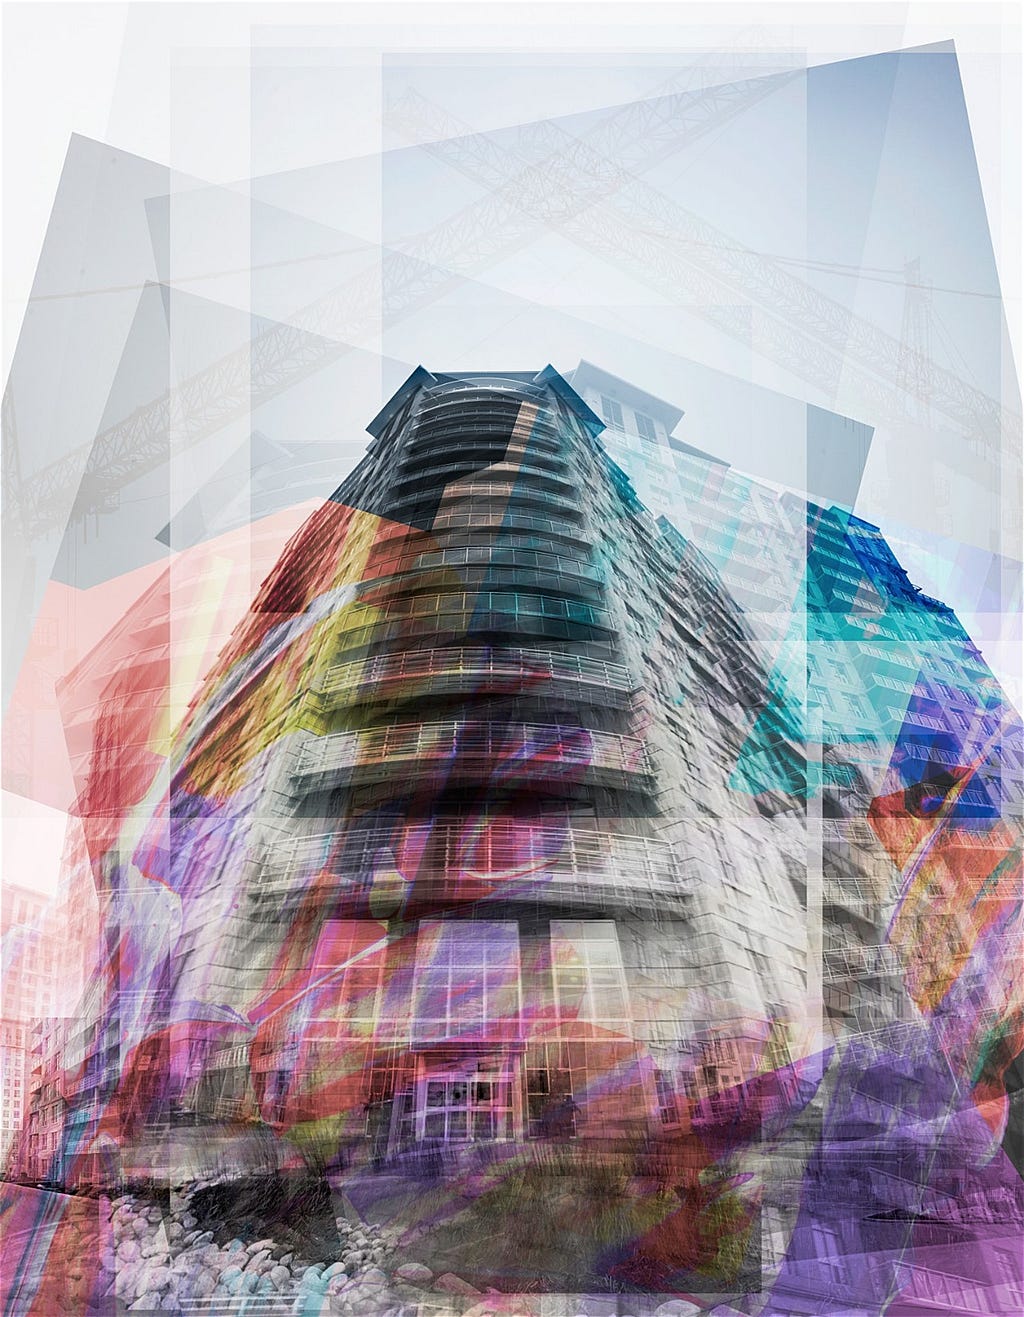 Abstract Architecture Art using Pomeroy Building in London Ontario by Scott Webb